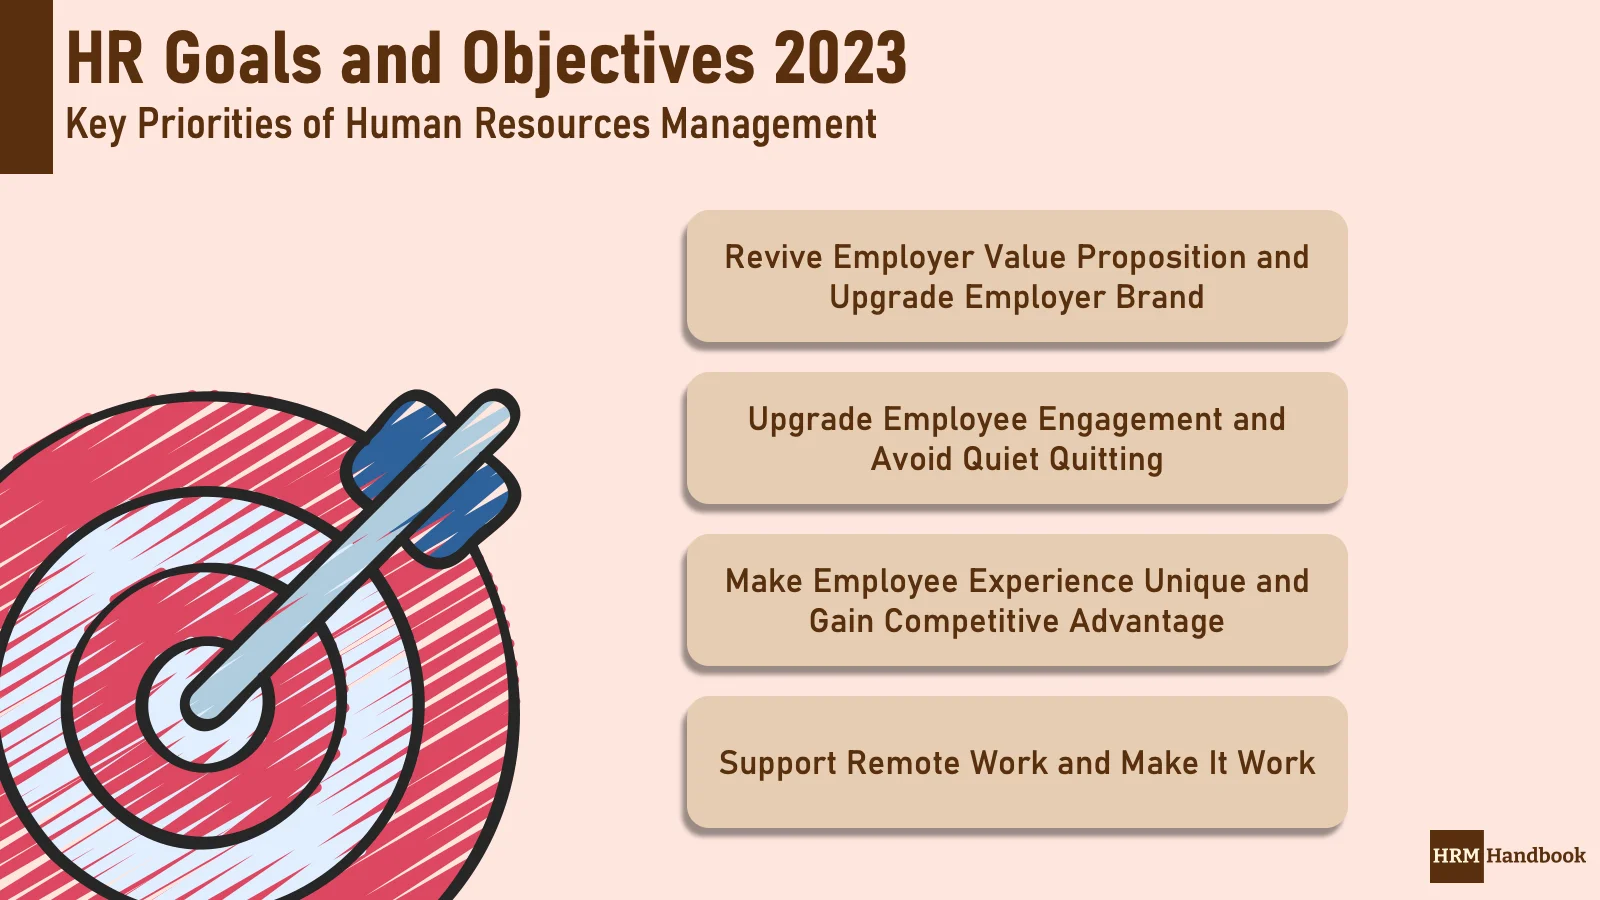 HR Goals and Objectives 2023